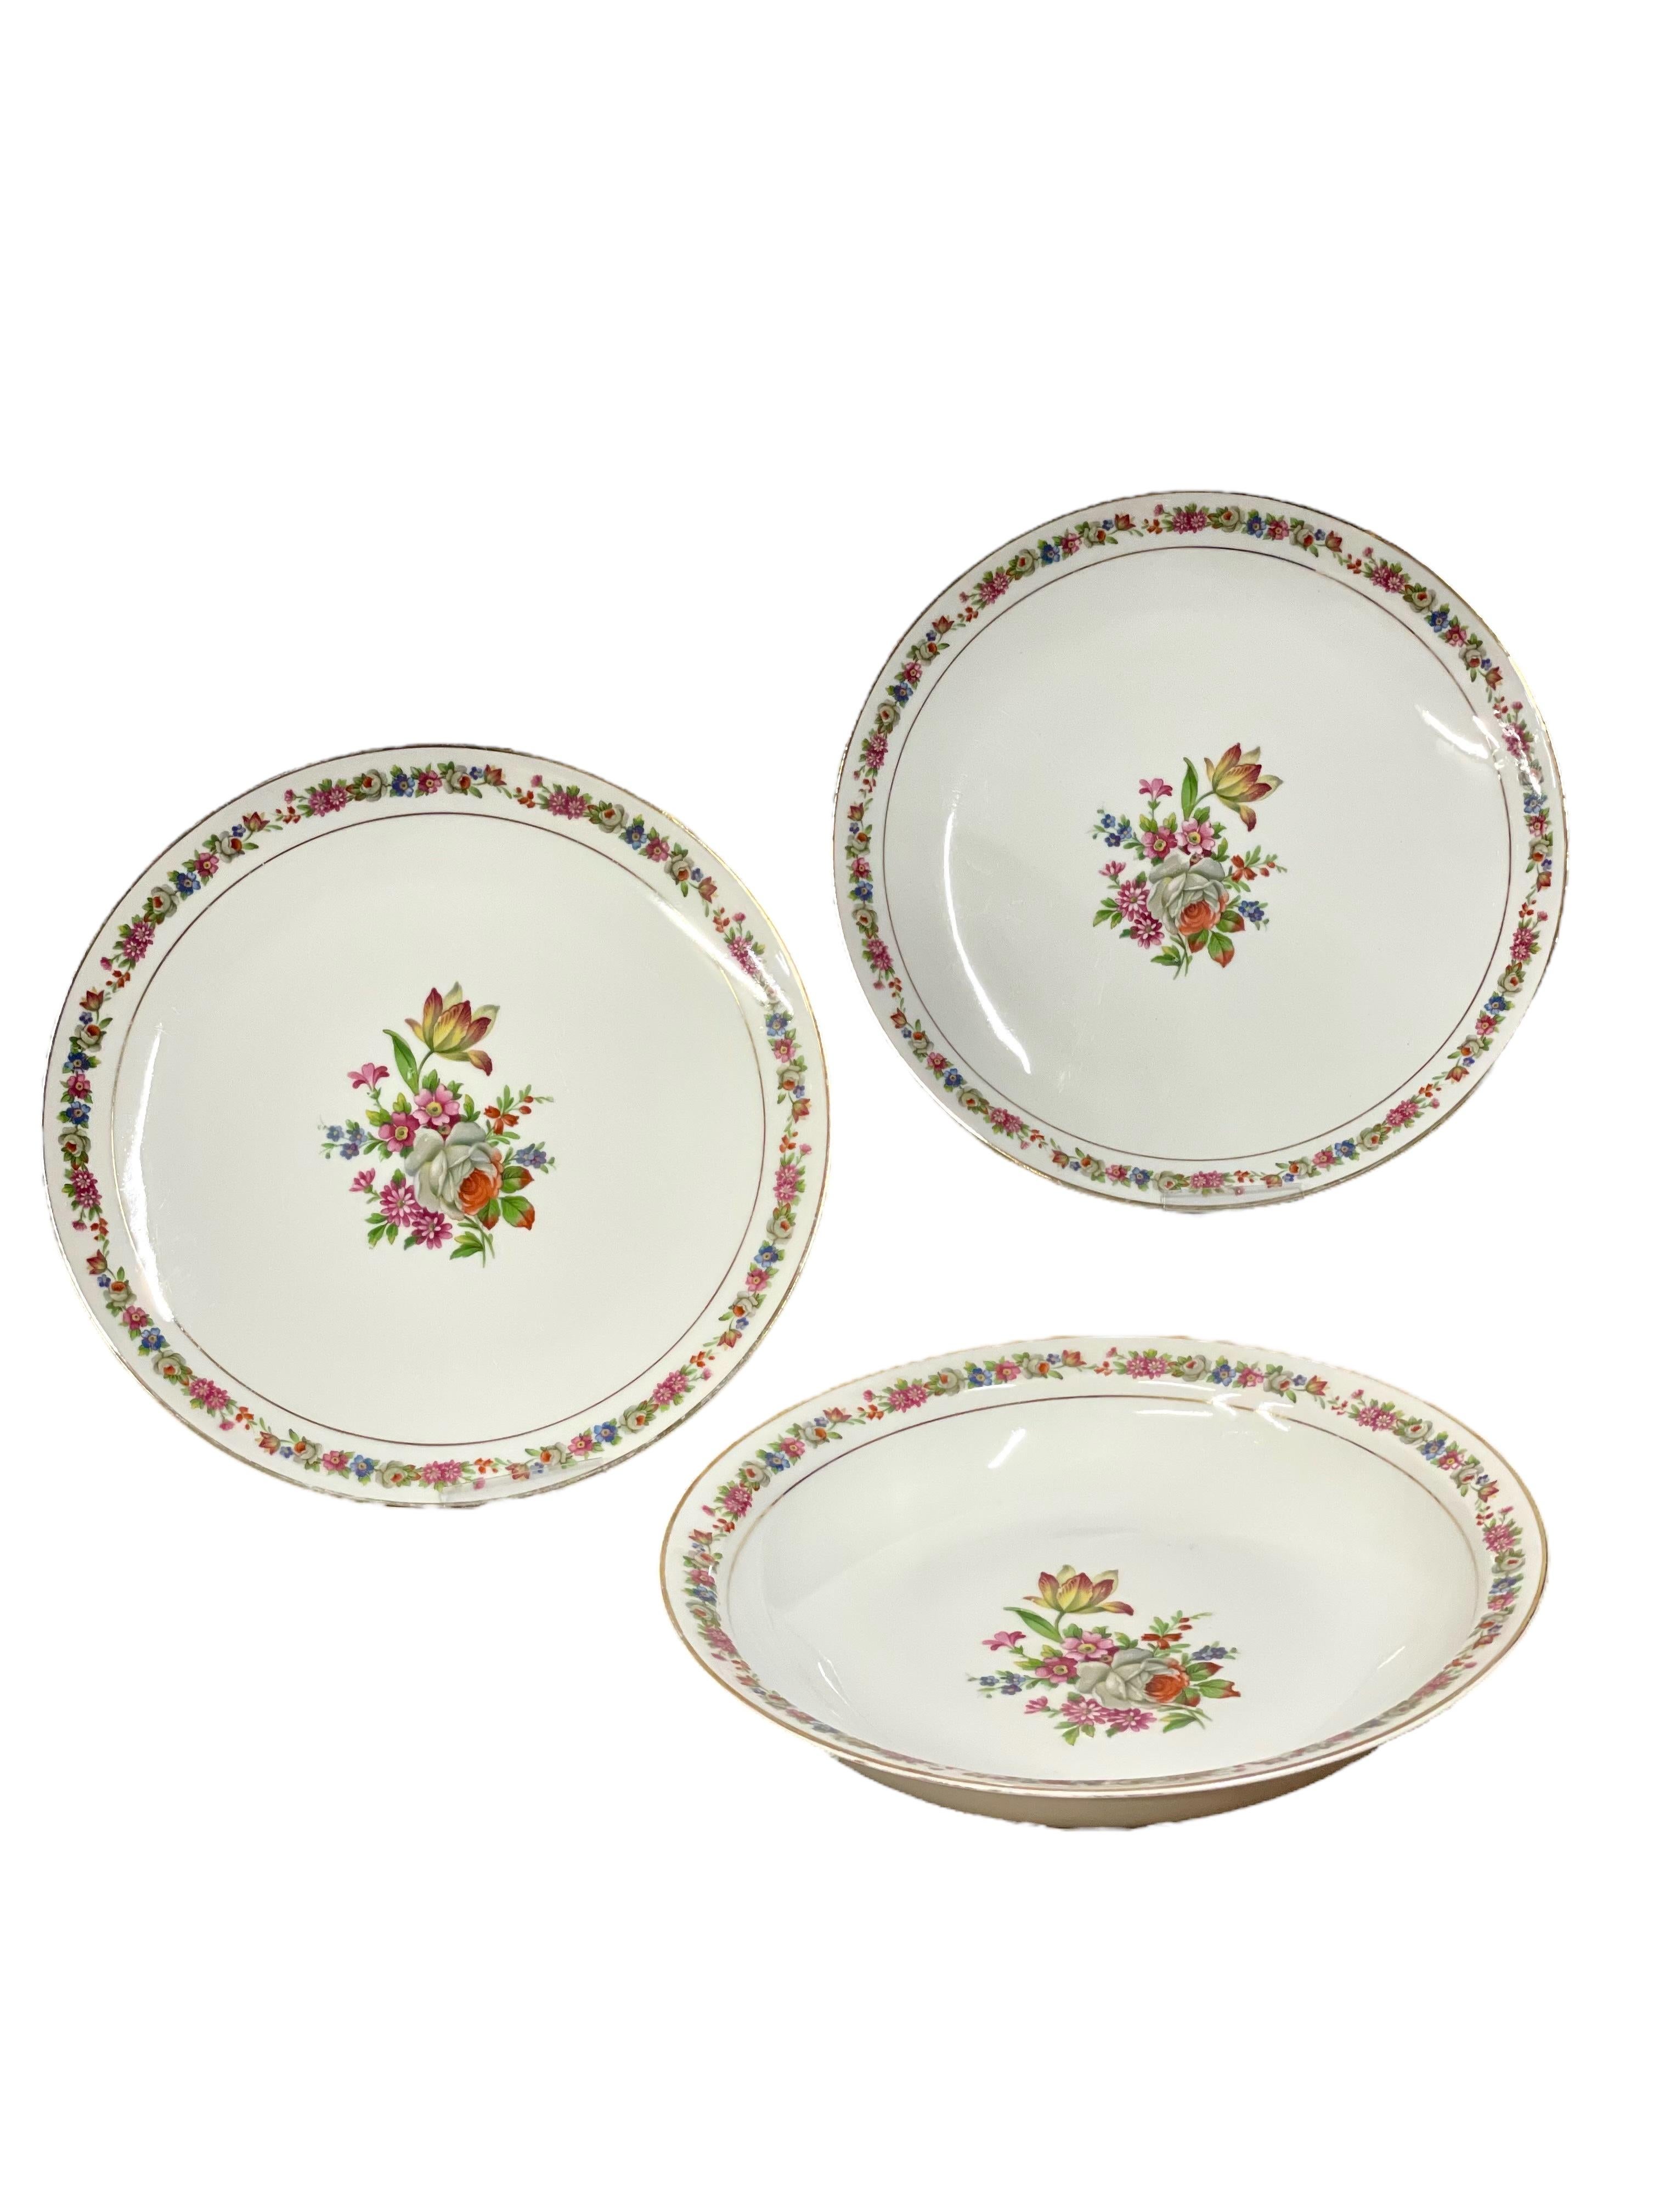 Dinner Service in Limoges Porcelain by Raynaud & Cie For Sale 2